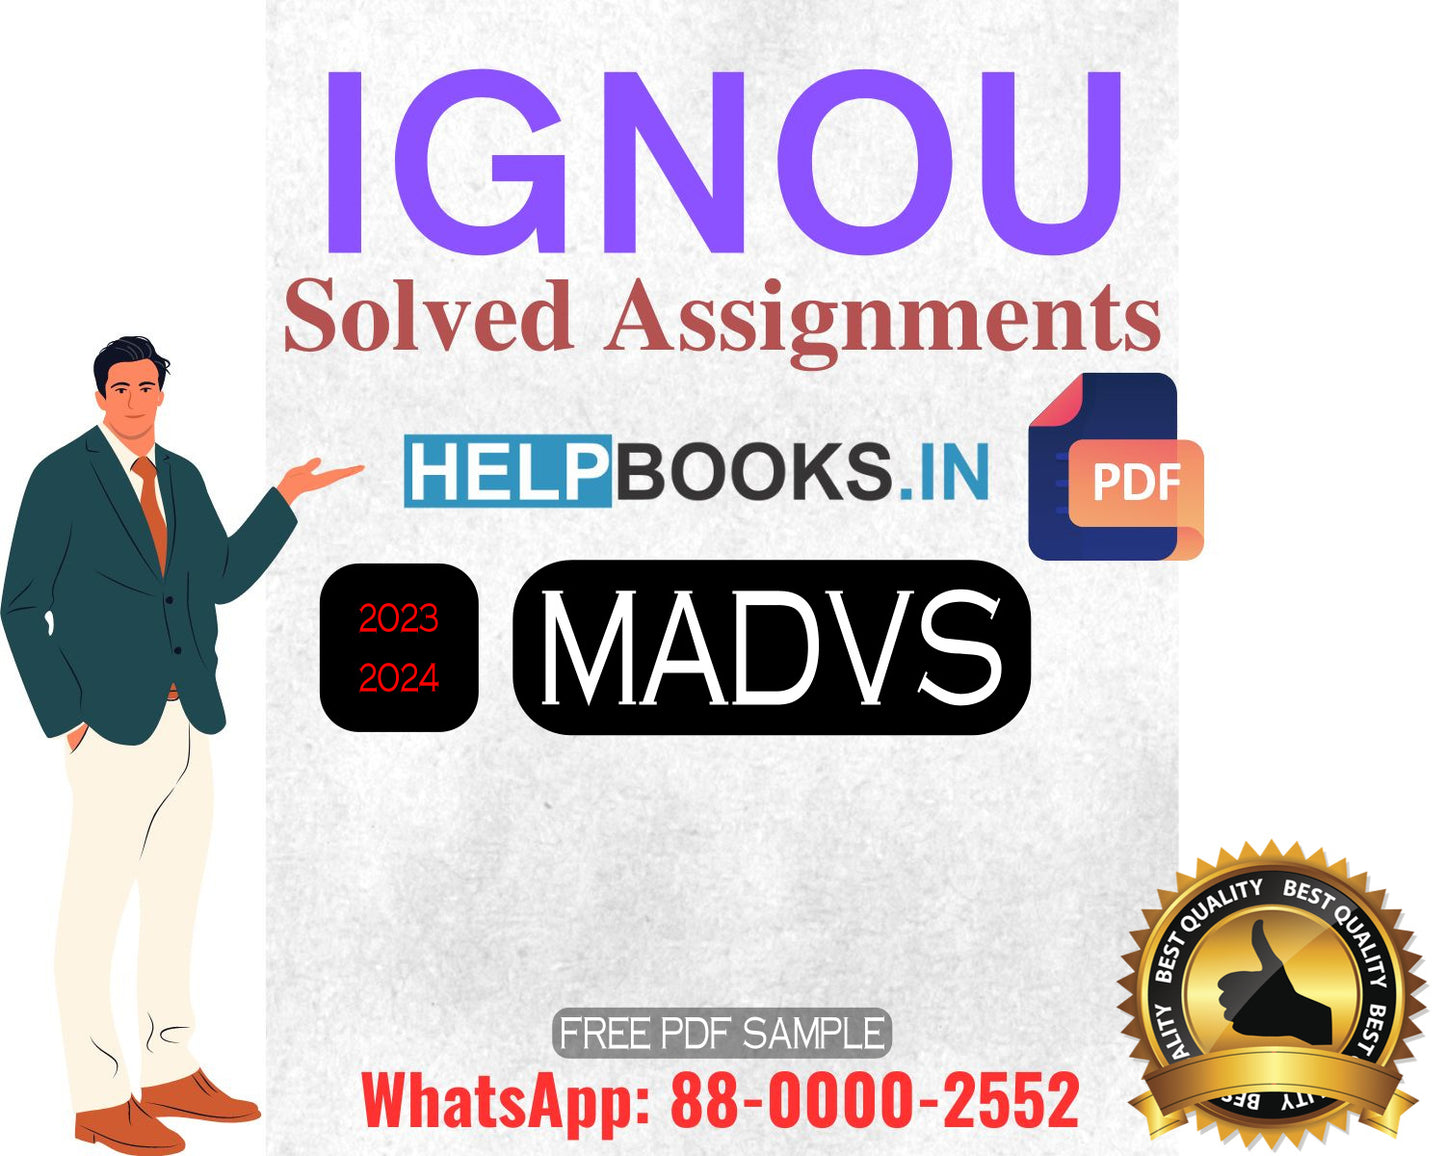 IGNOU Master's Degree Programme Latest IGNOU Solved Assignment 2023-24 : MADVS Master of Arts Development Studies Solved Assignments